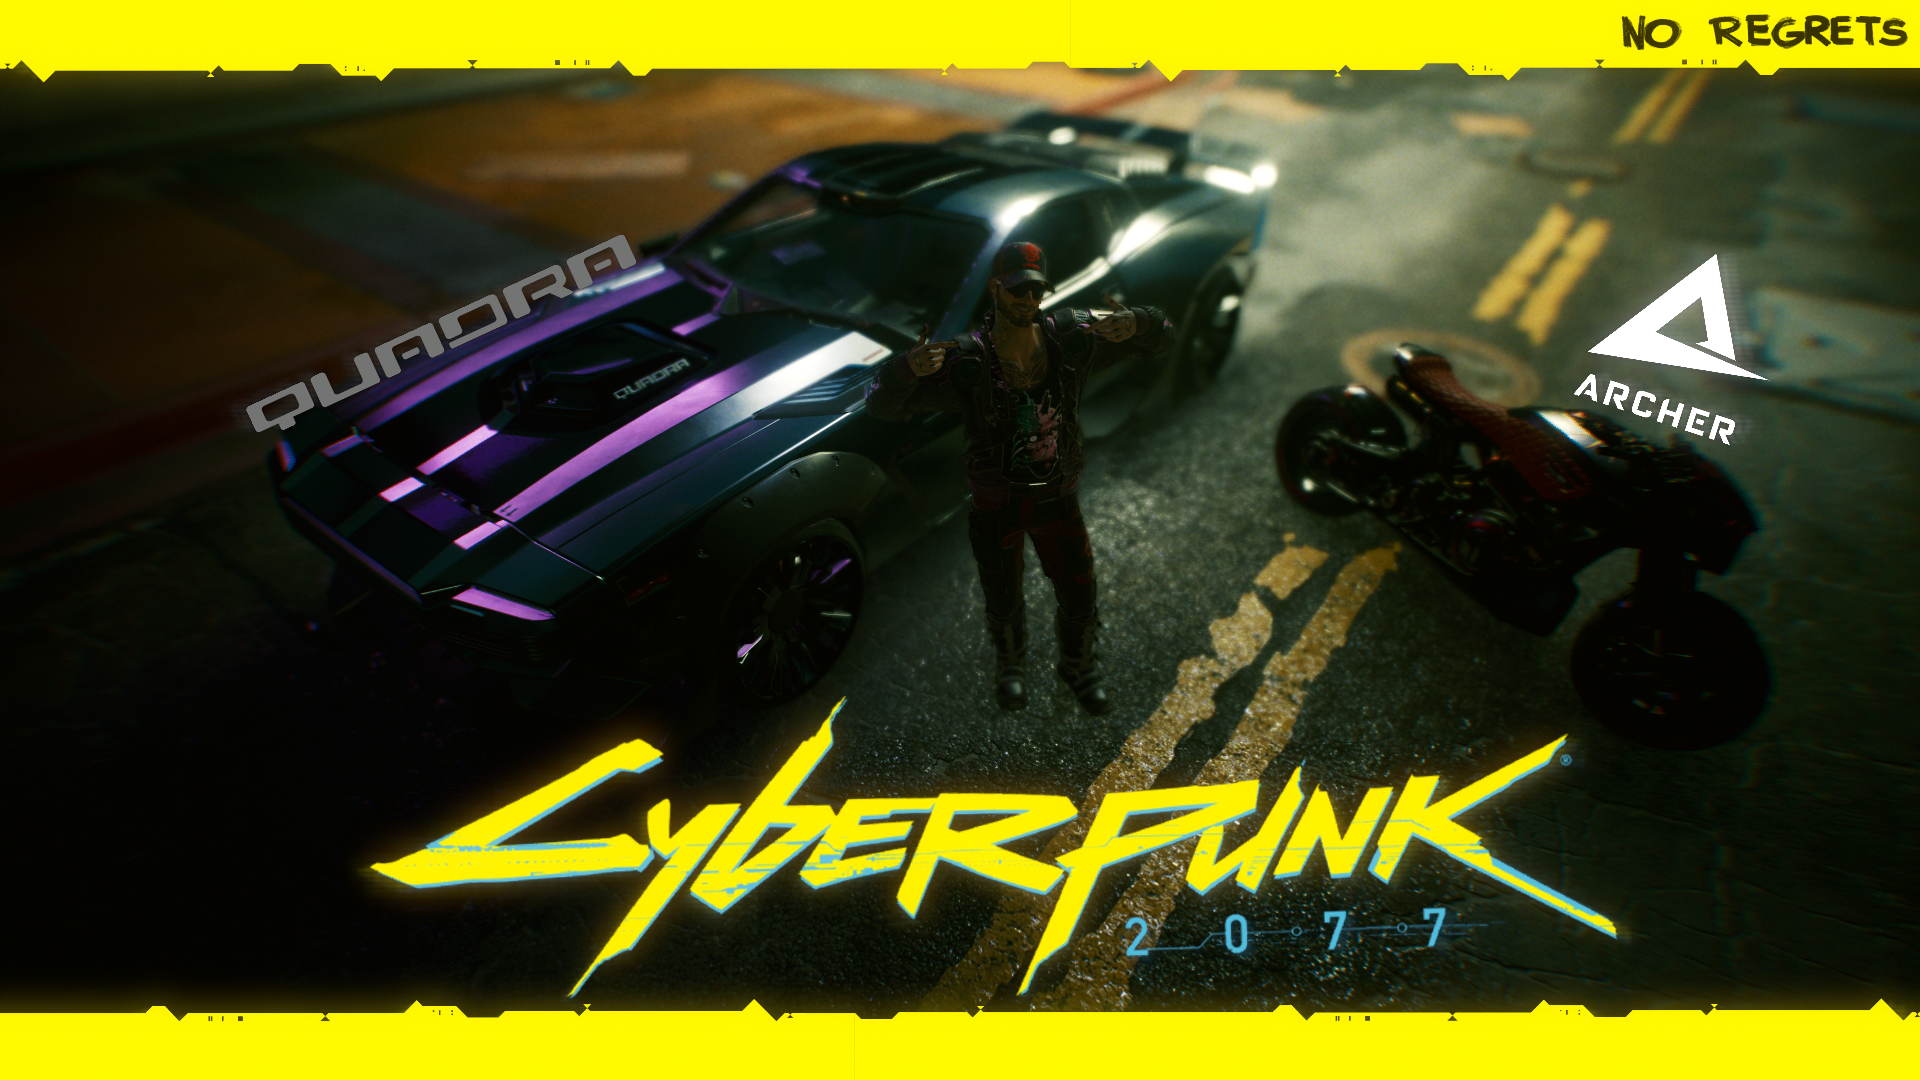 Cyberpunk 2077 picture car and moto.PNG